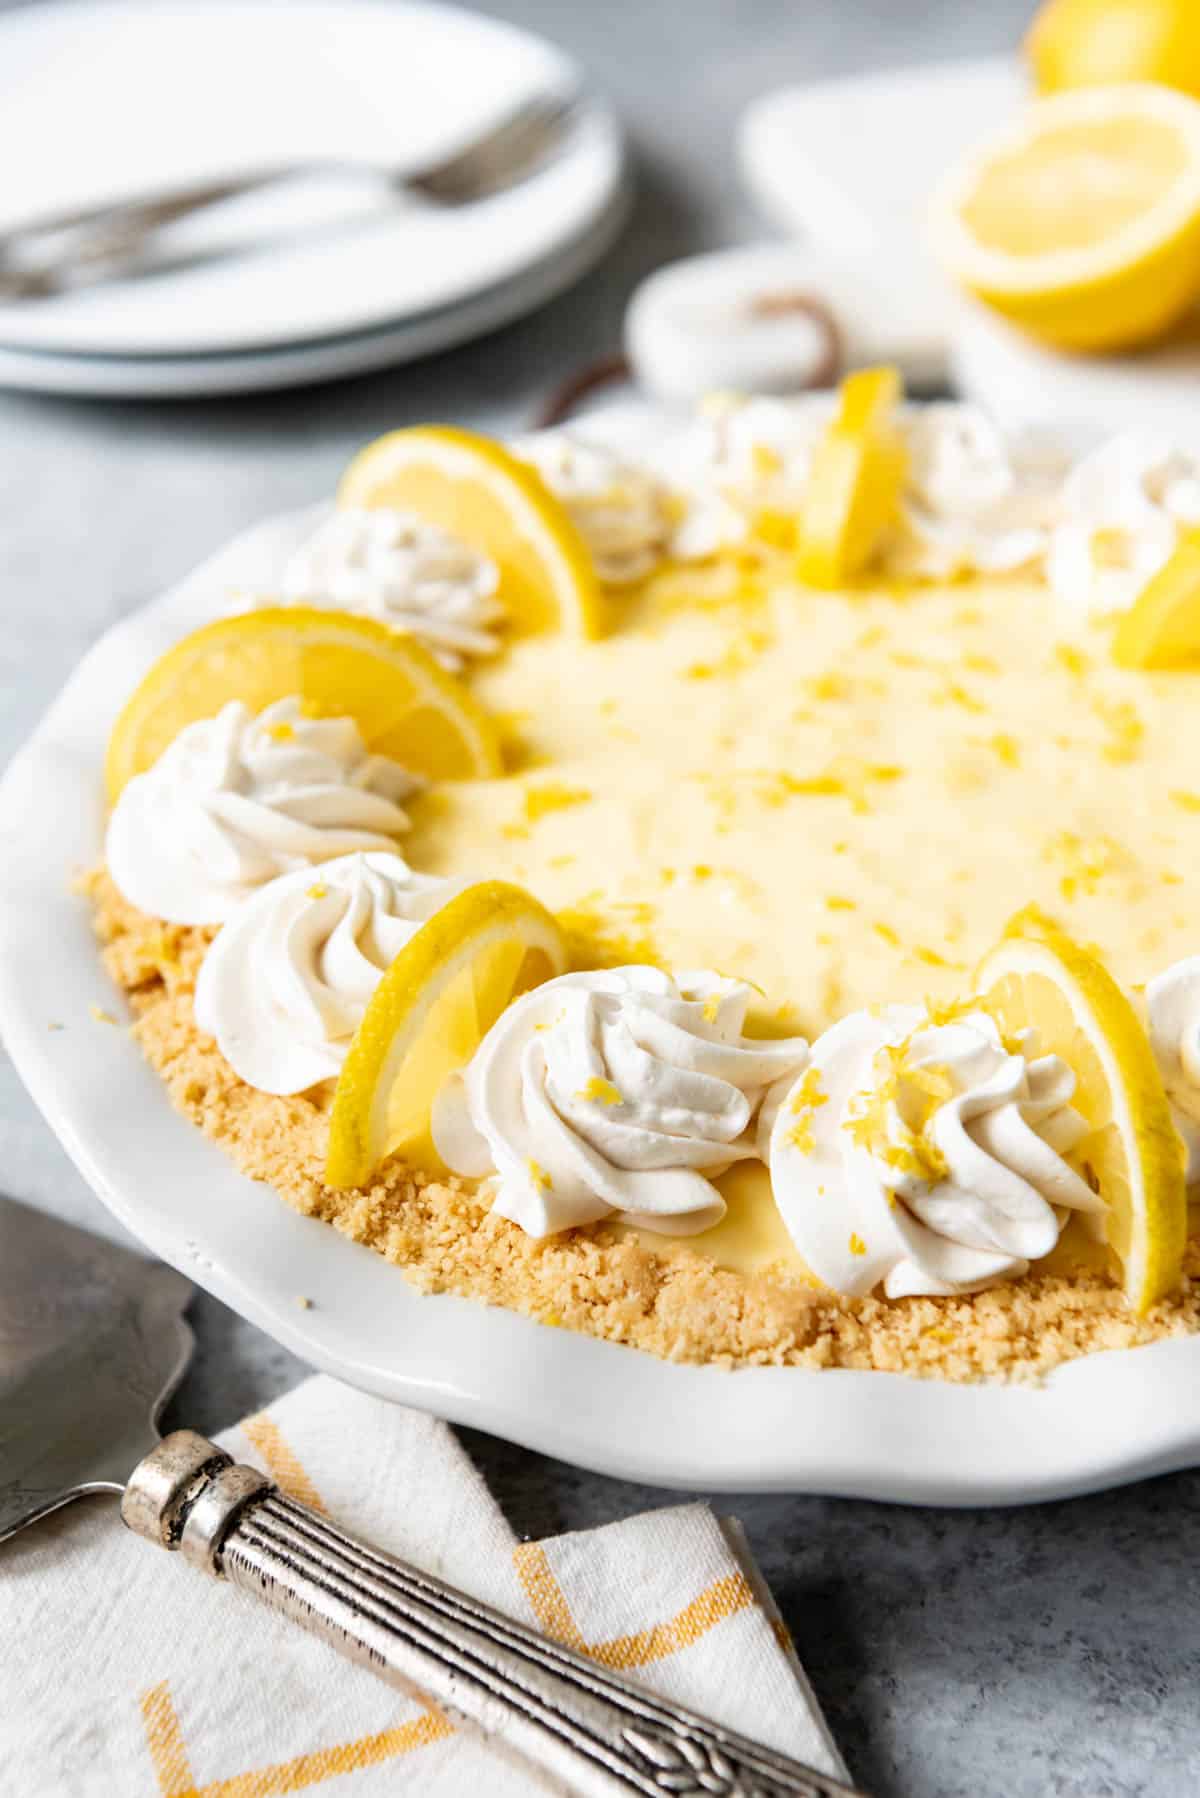 A no bake sour cream lemon pie in a white pie plate garnished with whipped cream and lemon slices.